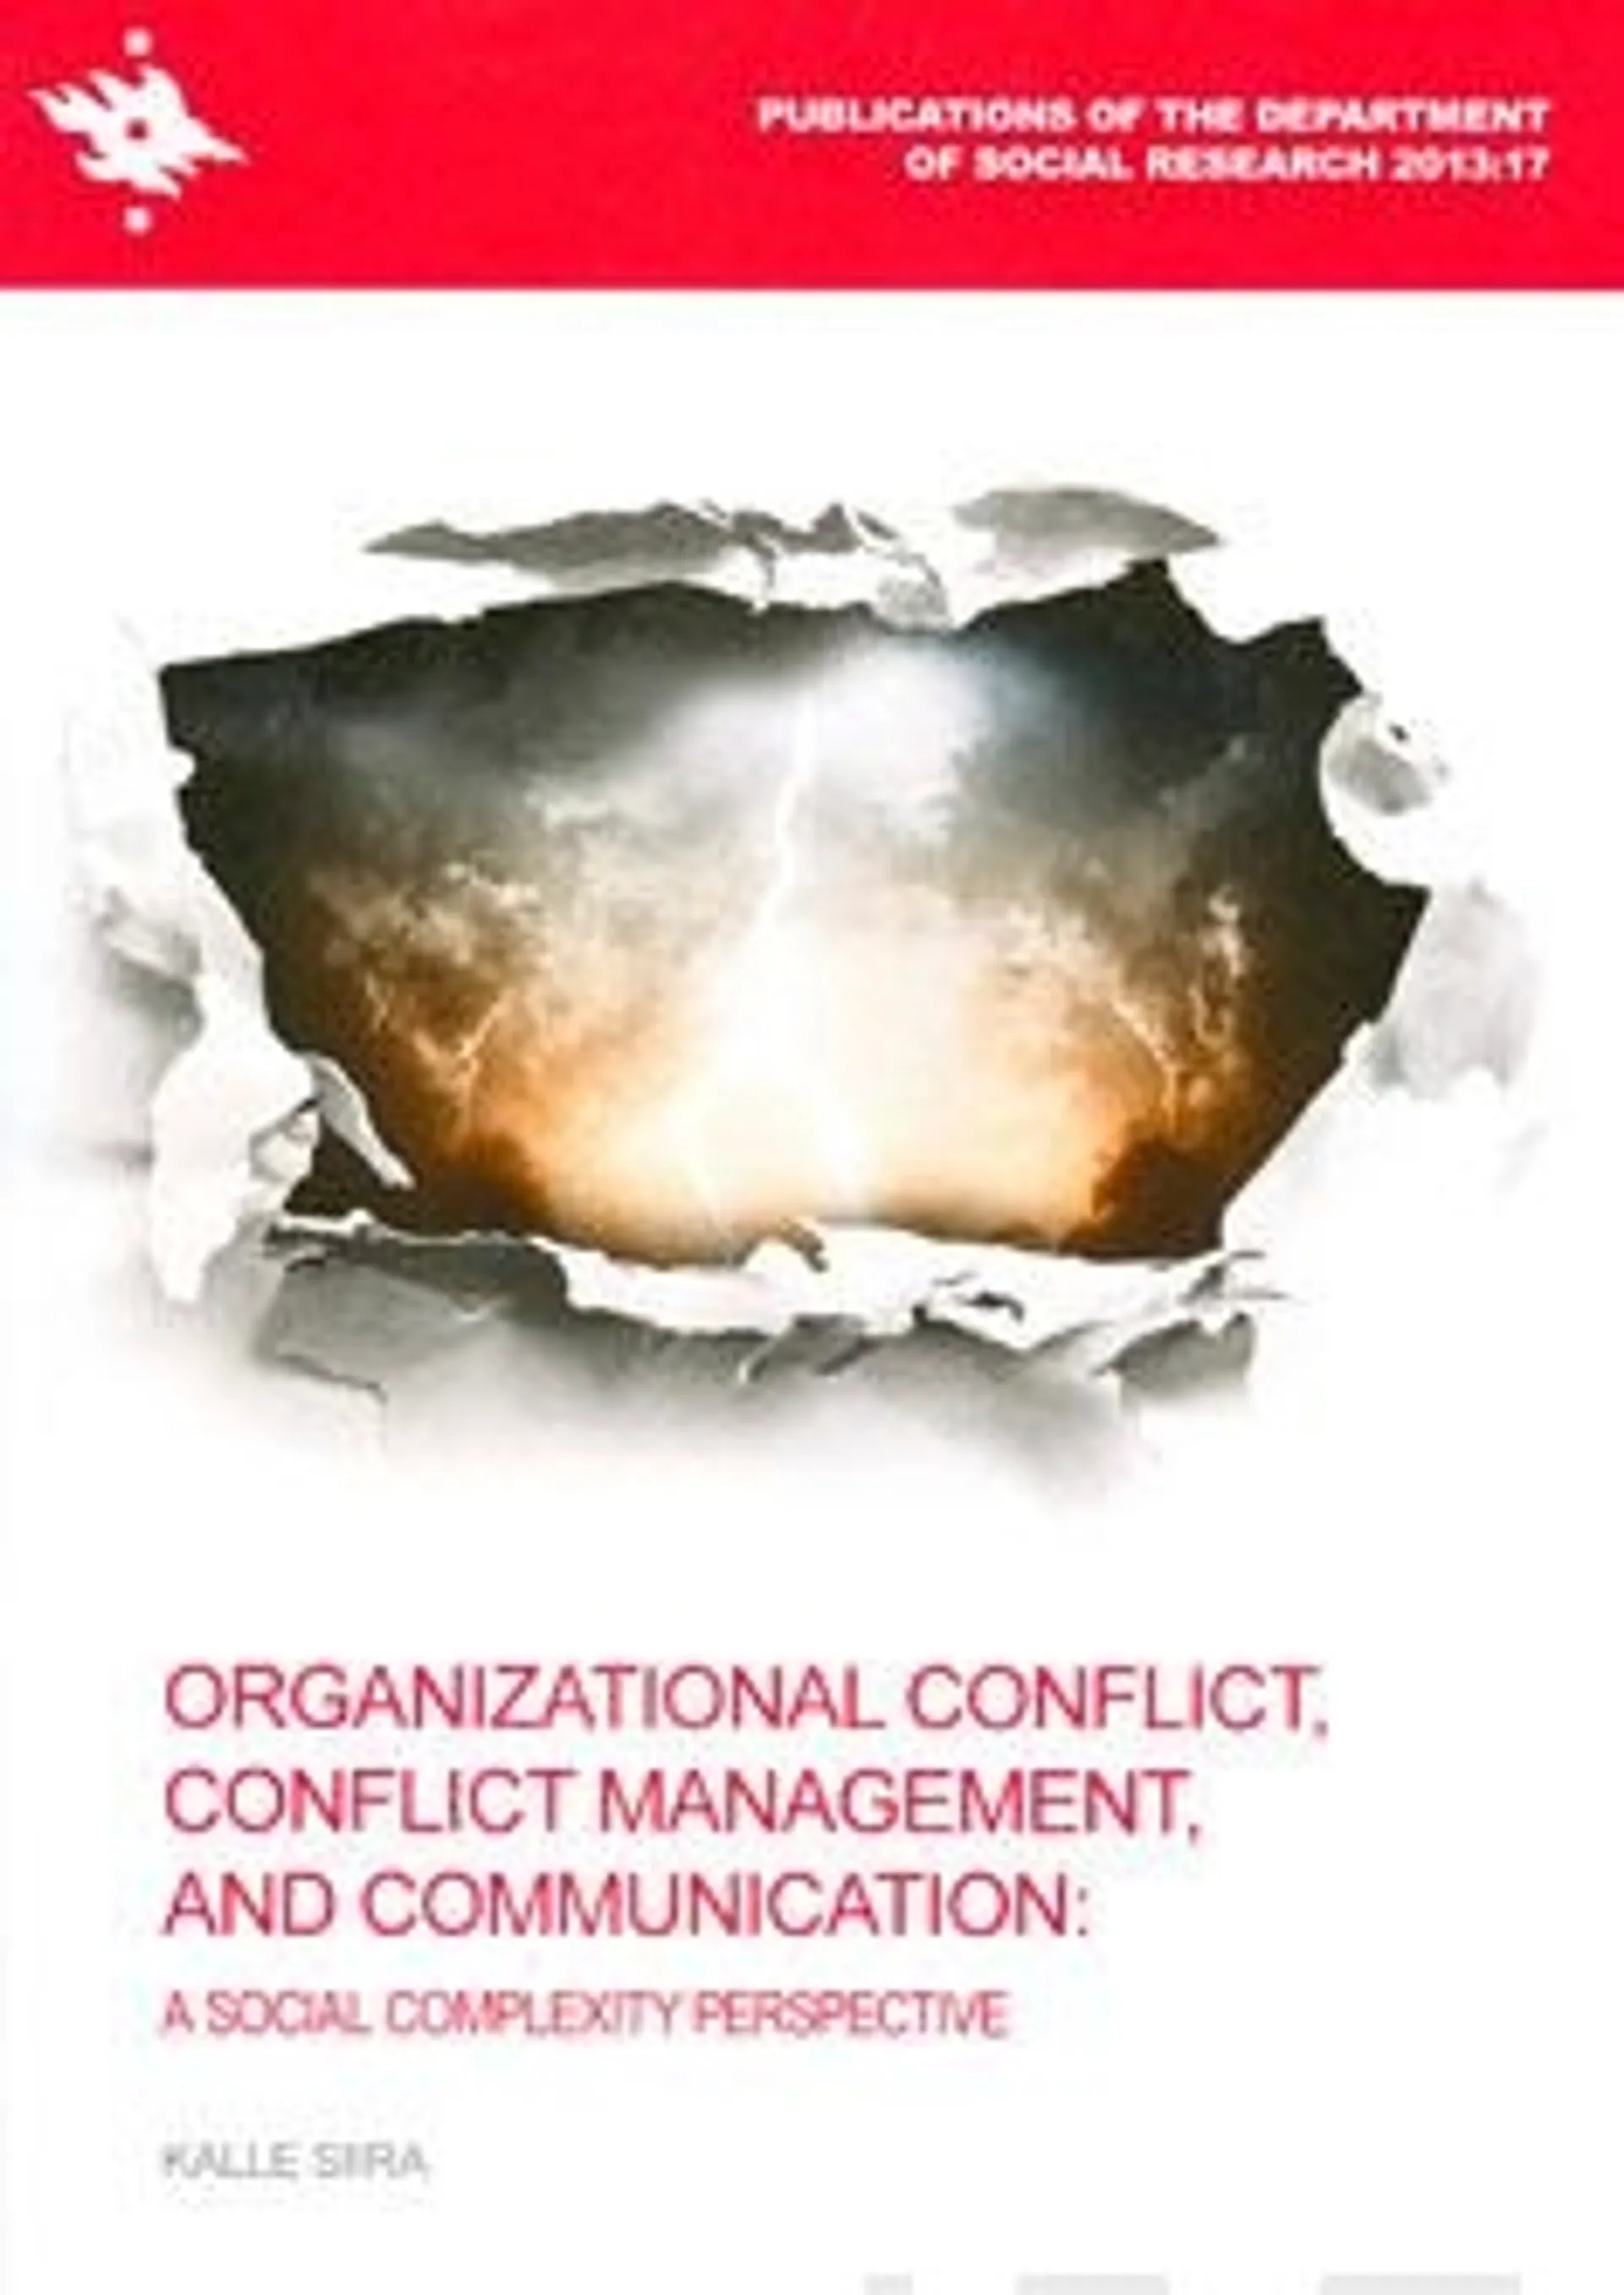 Siira, Organizational conflict, conflict management, and communication